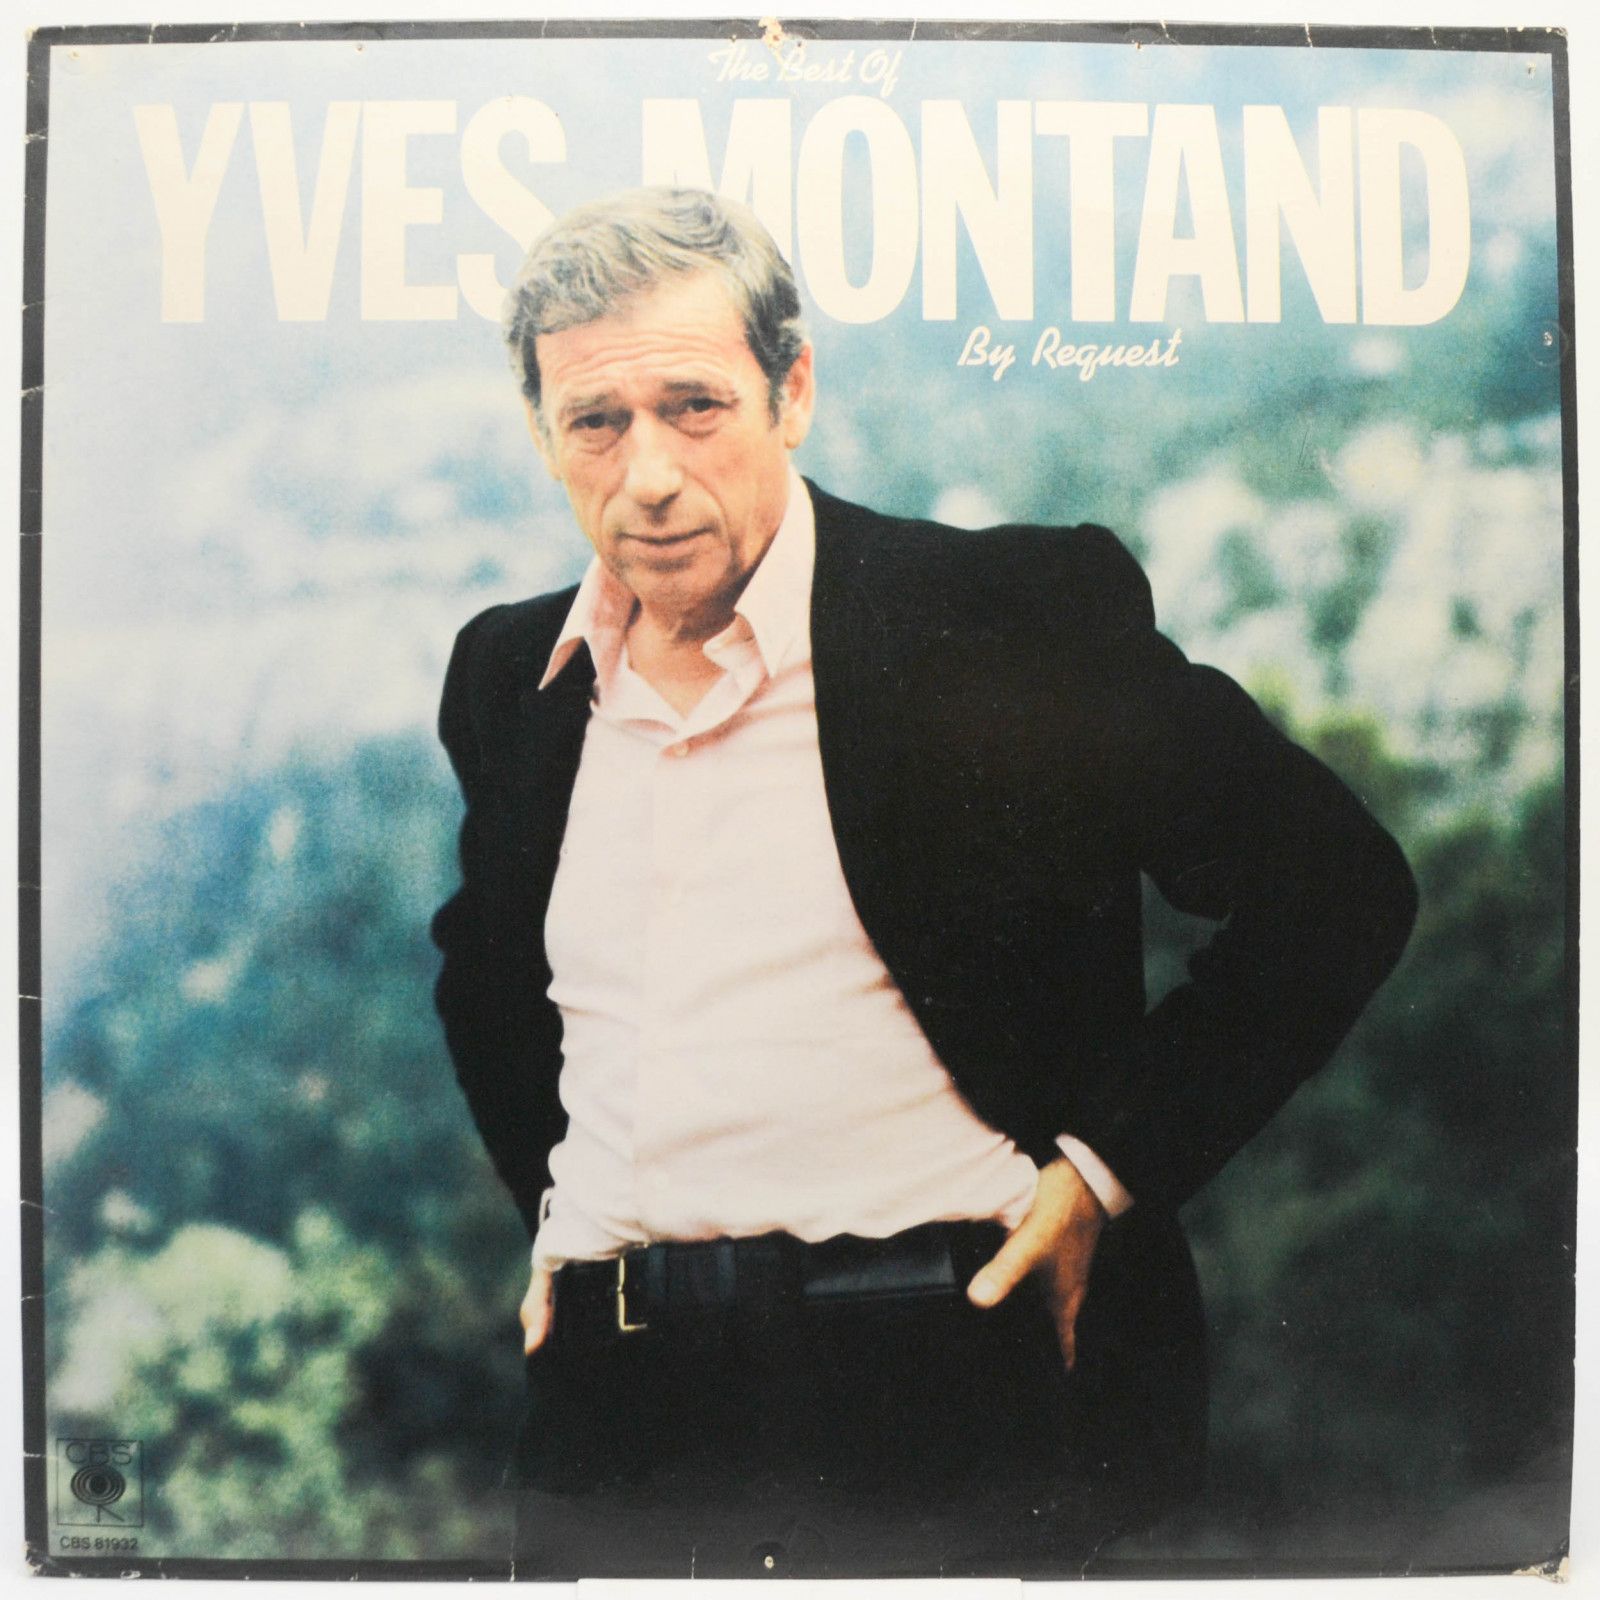 Yves Montand — The Best Of Yves Montand ...By Request, 1978